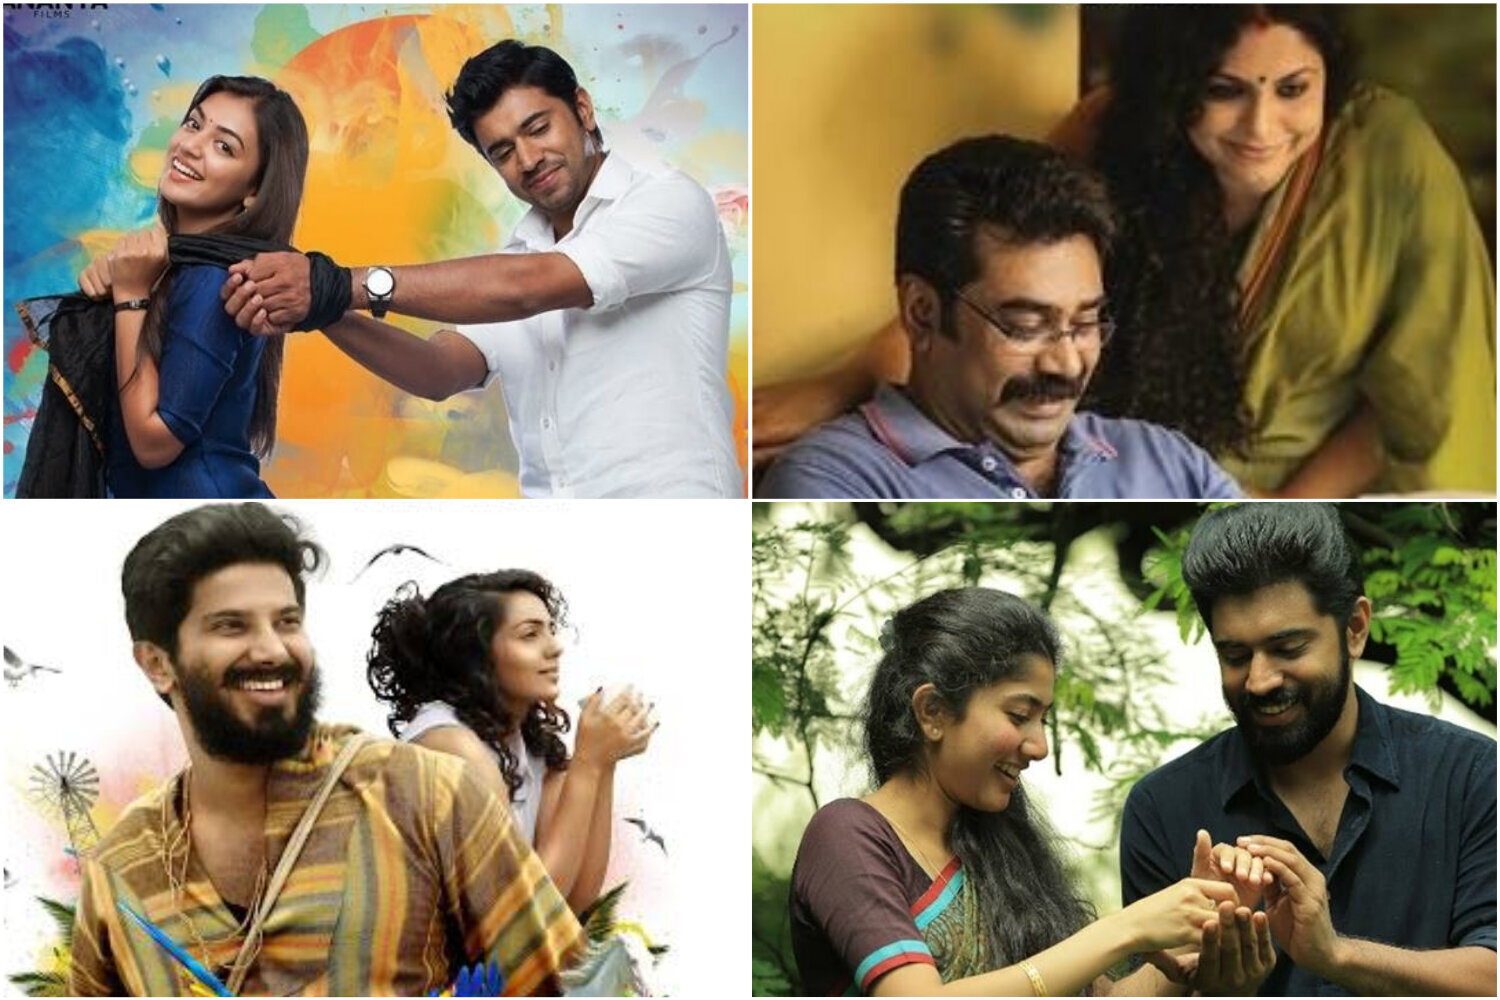 What opinion do non-Keralites have about the movie 'Premam'? Do you like  it? - Quora